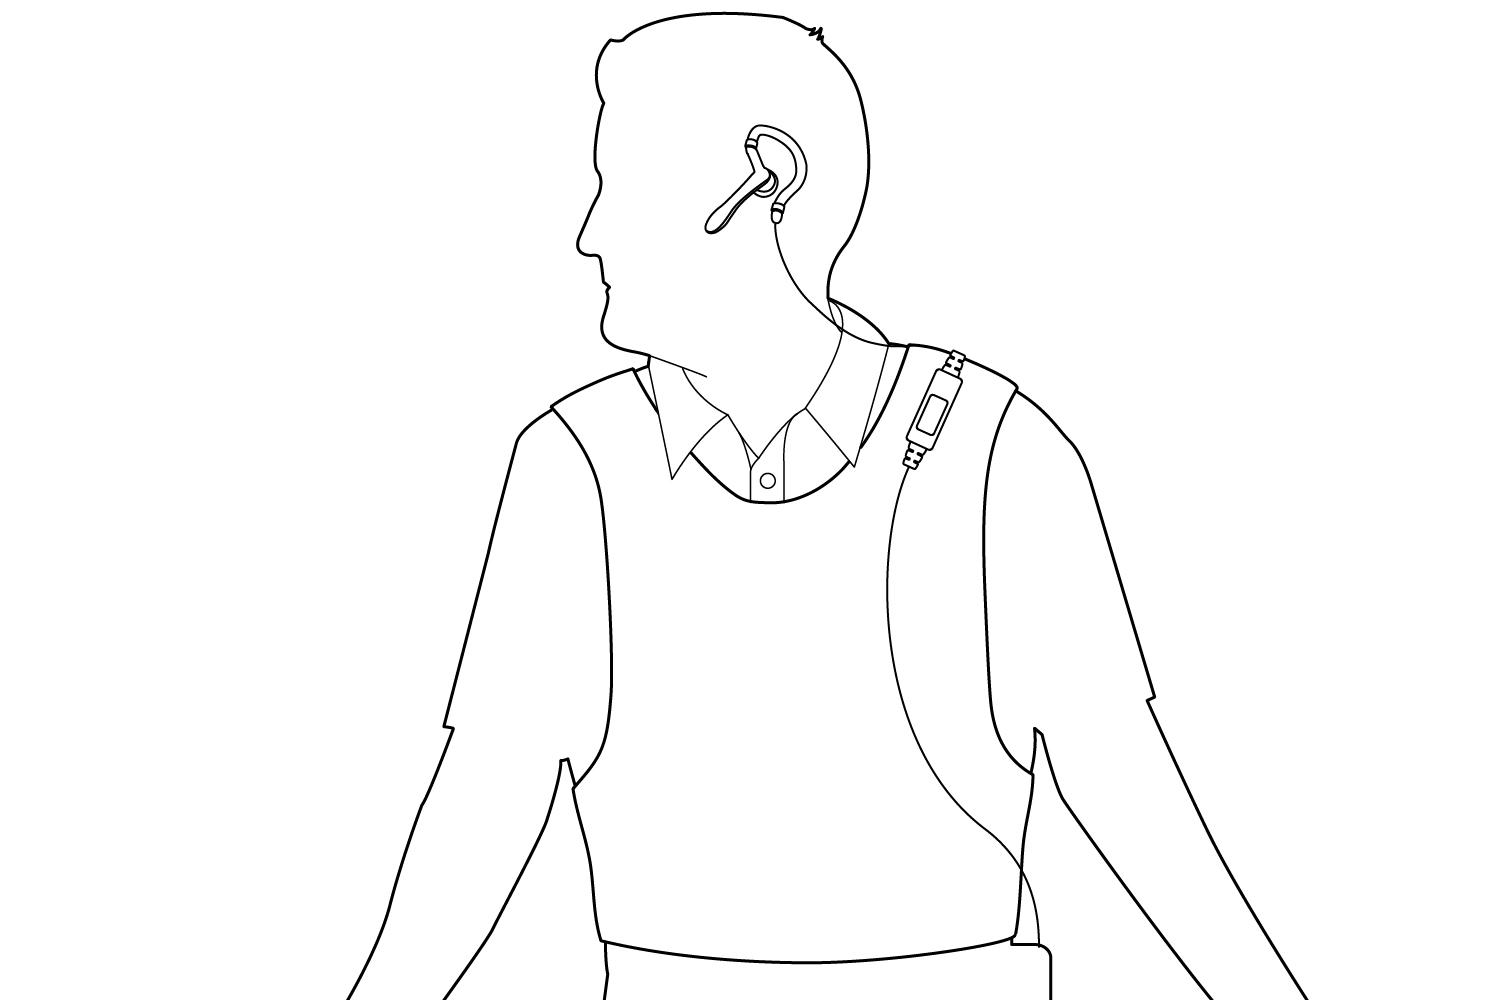 Wearing With Vest Diagram